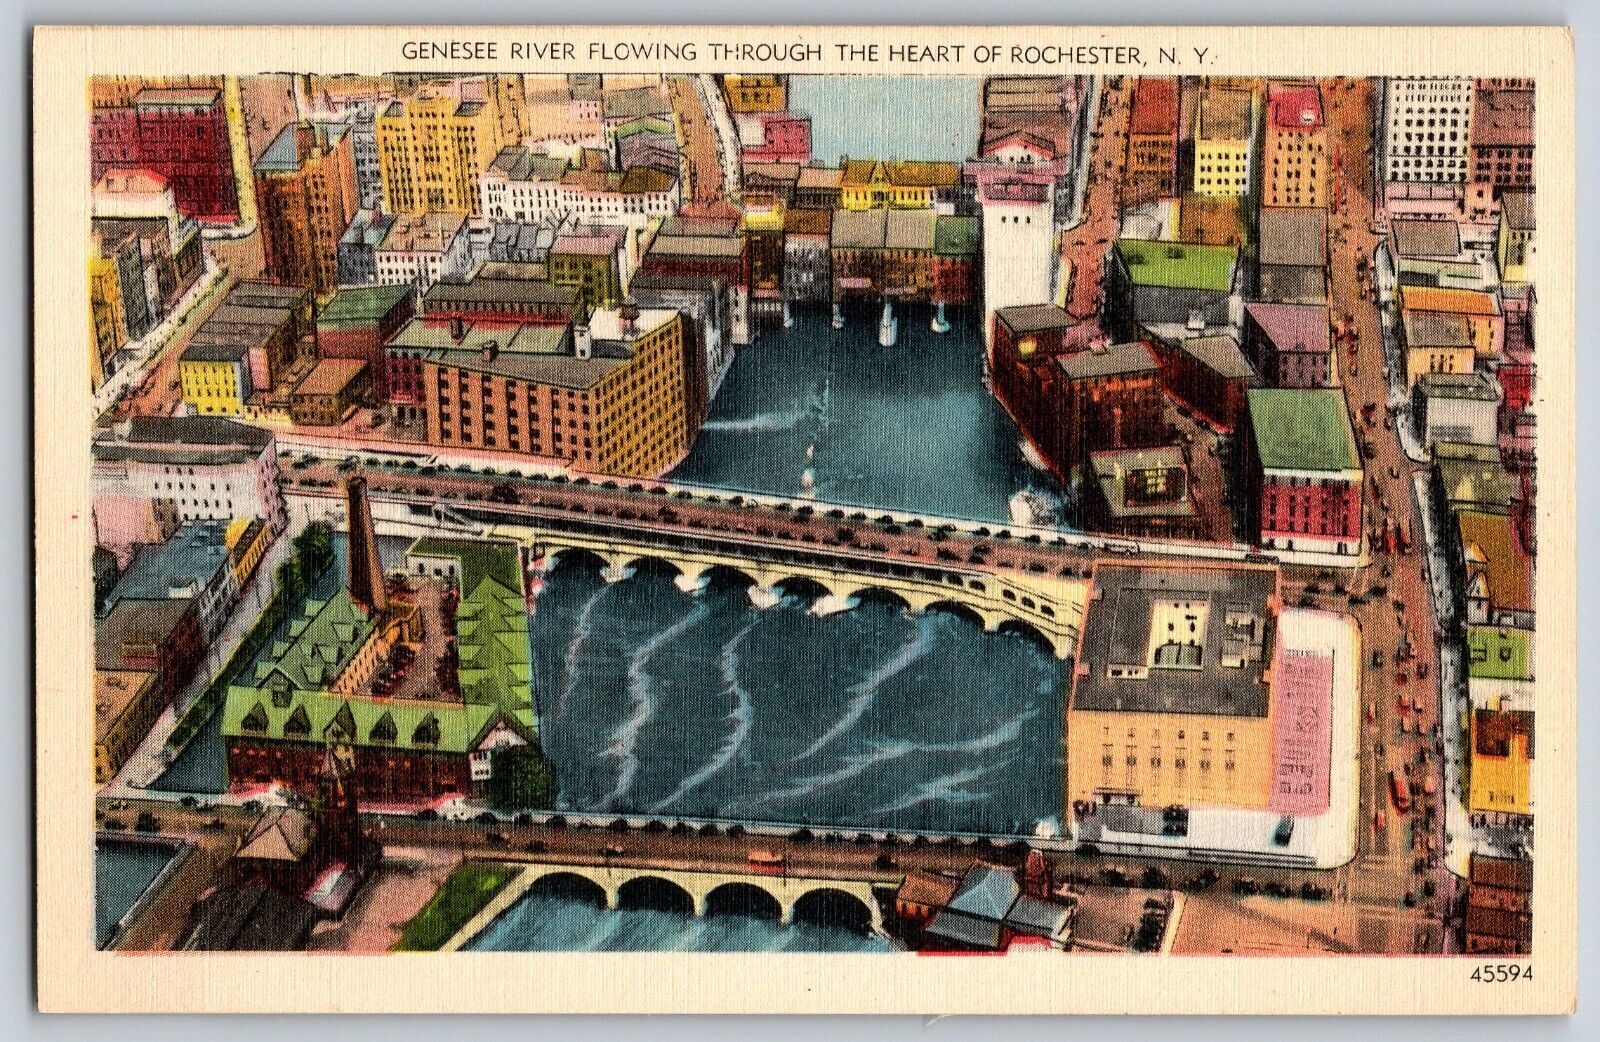 New York, Rochester - Genesee River Flowing Through The Heart - Vintage Postcard